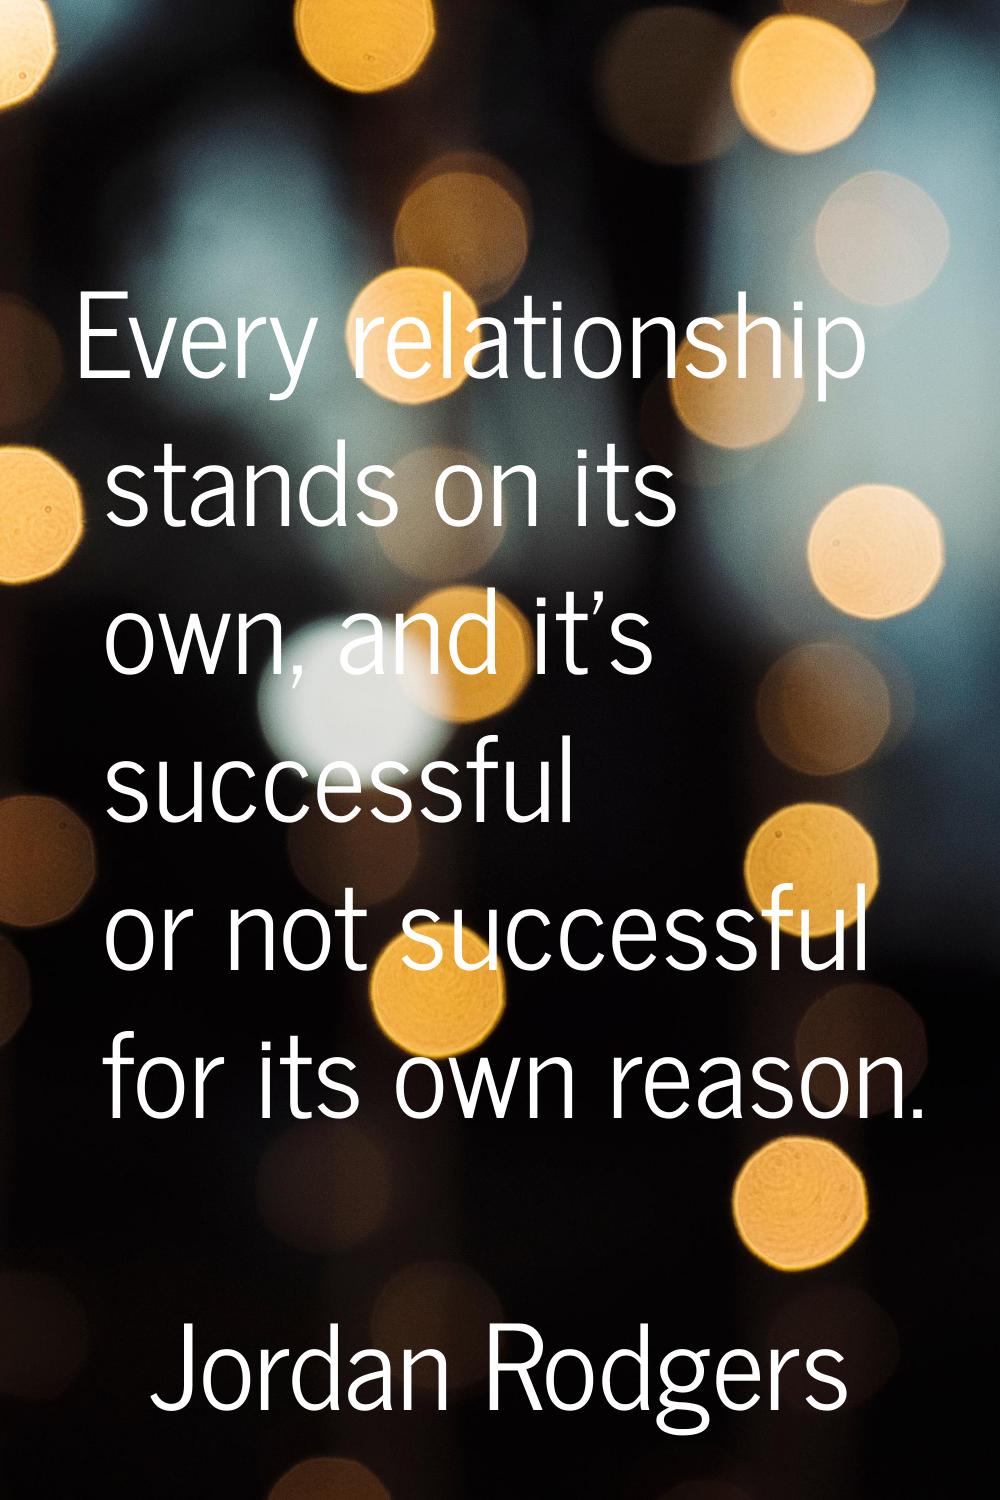 Every relationship stands on its own, and it's successful or not successful for its own reason.